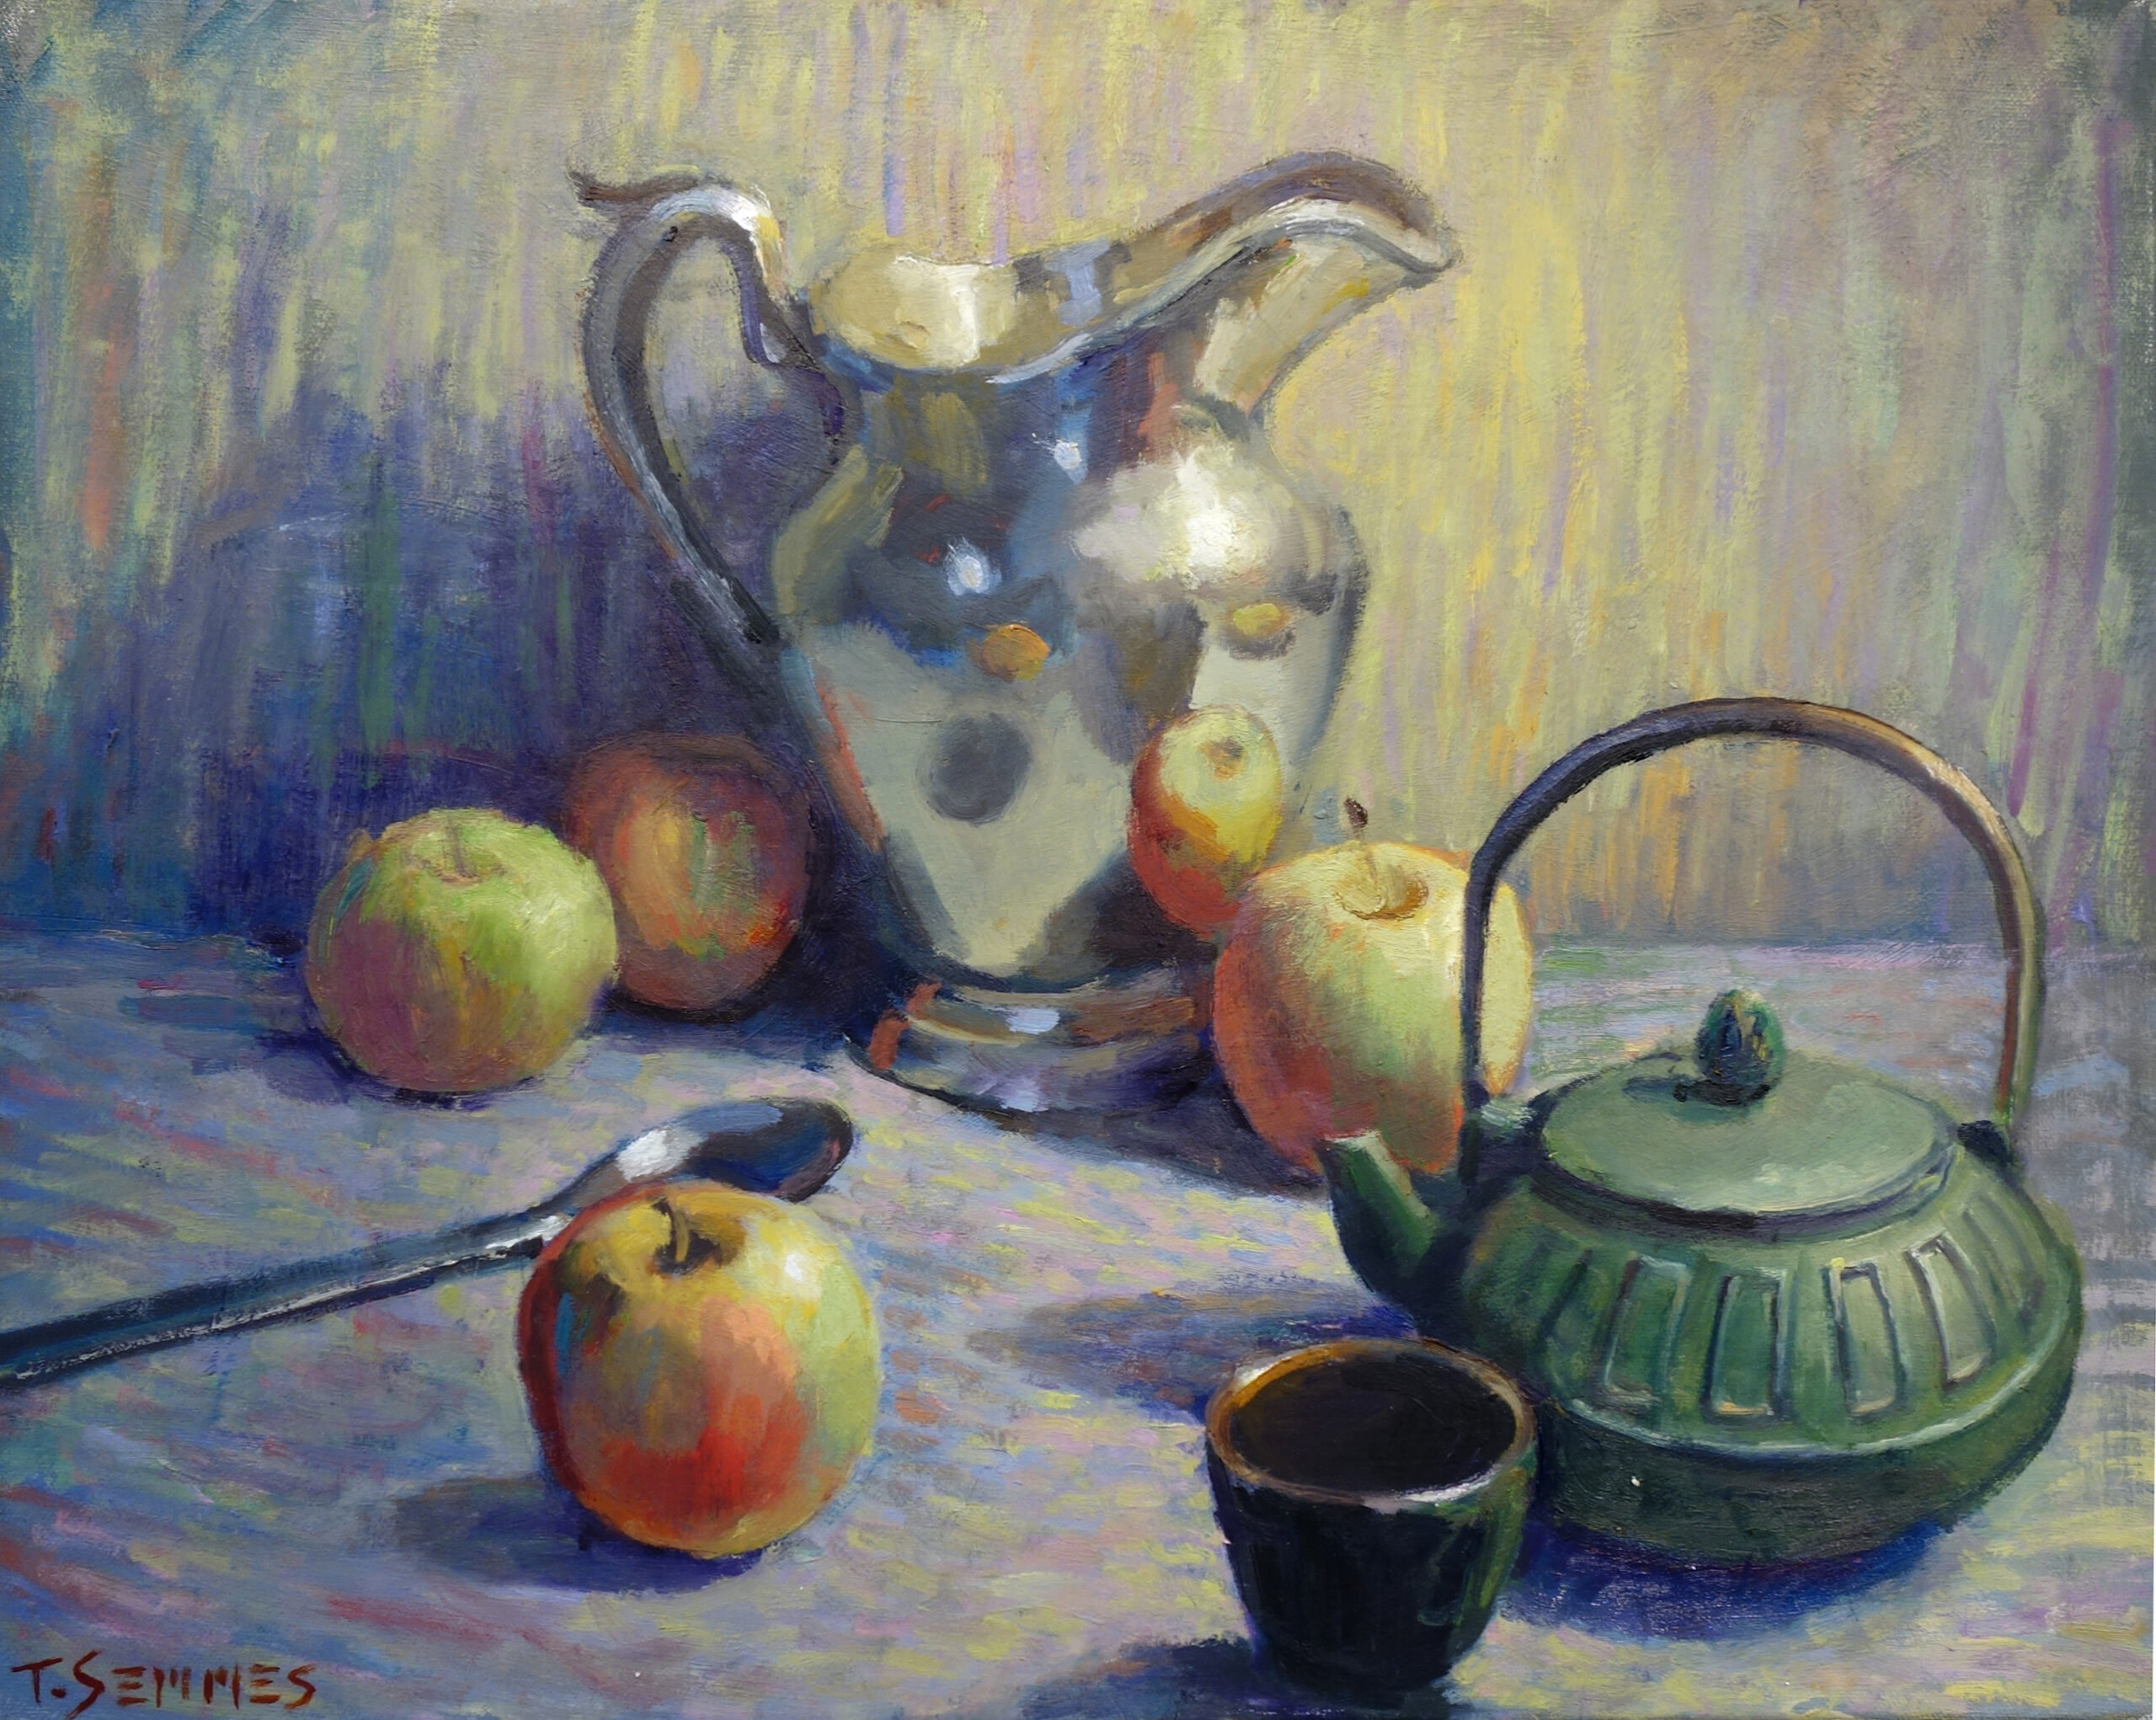 Pitcher, Teapot and Four Apples